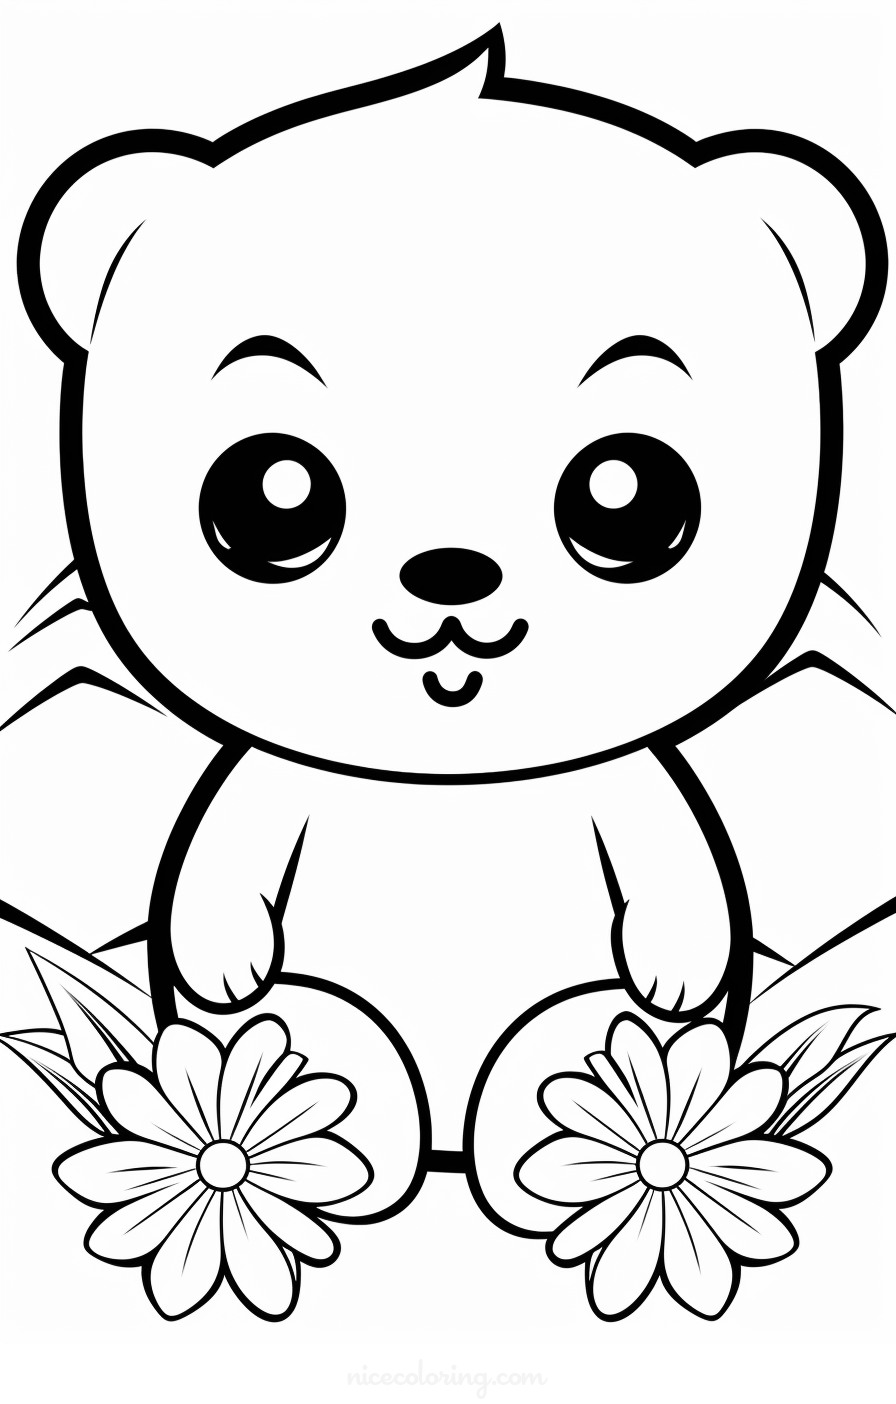 A bear family in the forest coloring page